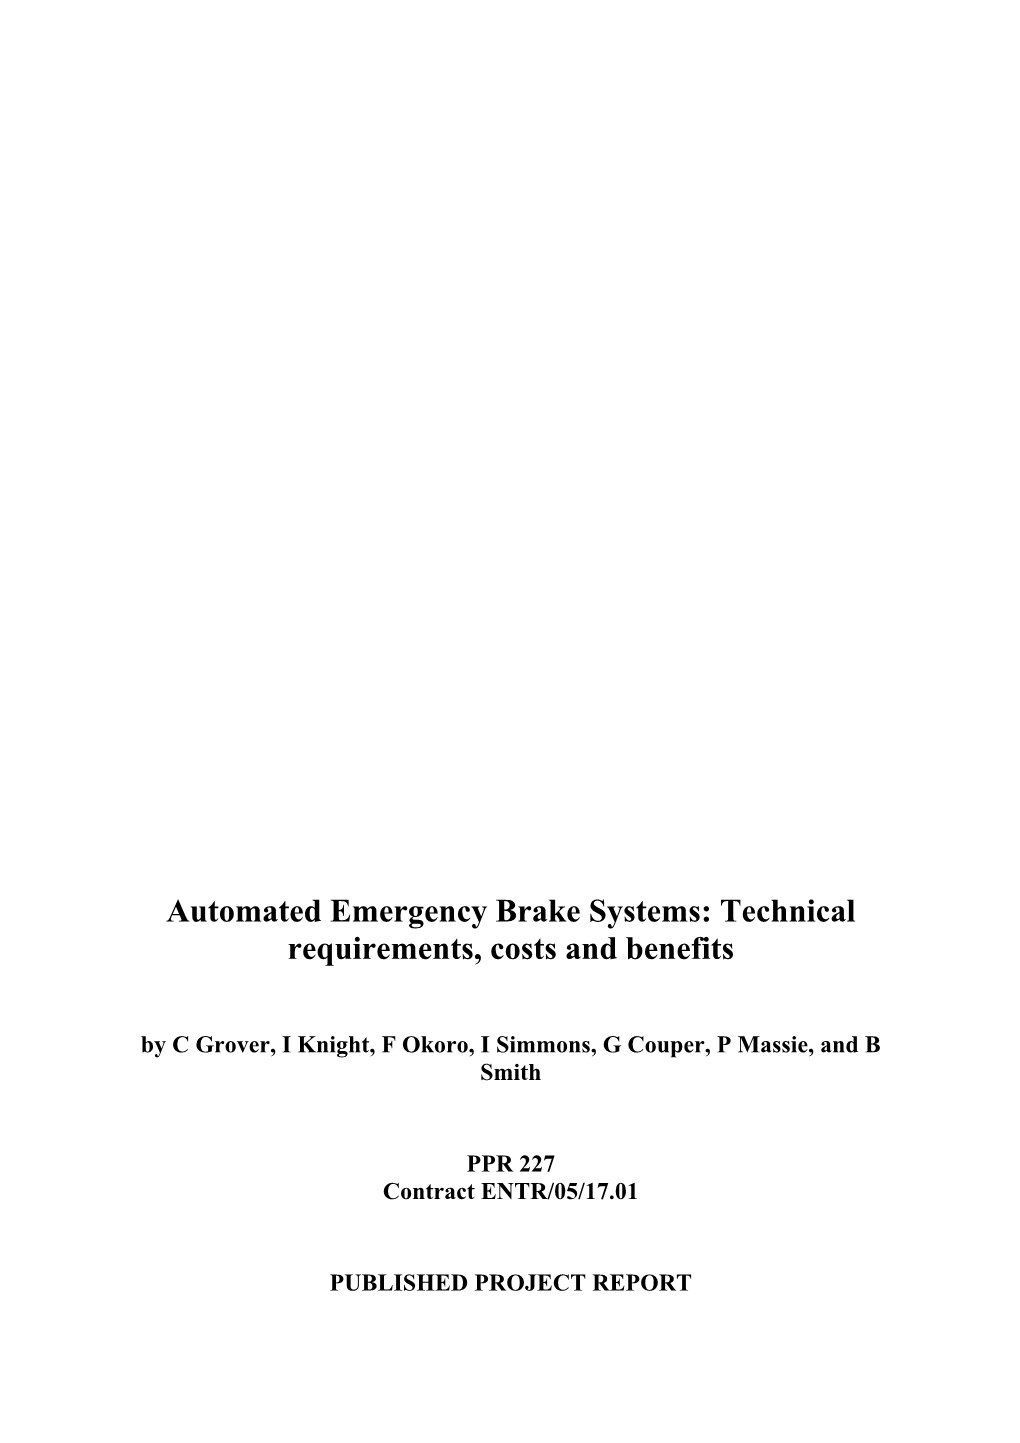 Final Report: Automated Emergency Braking Systems: Technical Requirements, Costs and Benefits